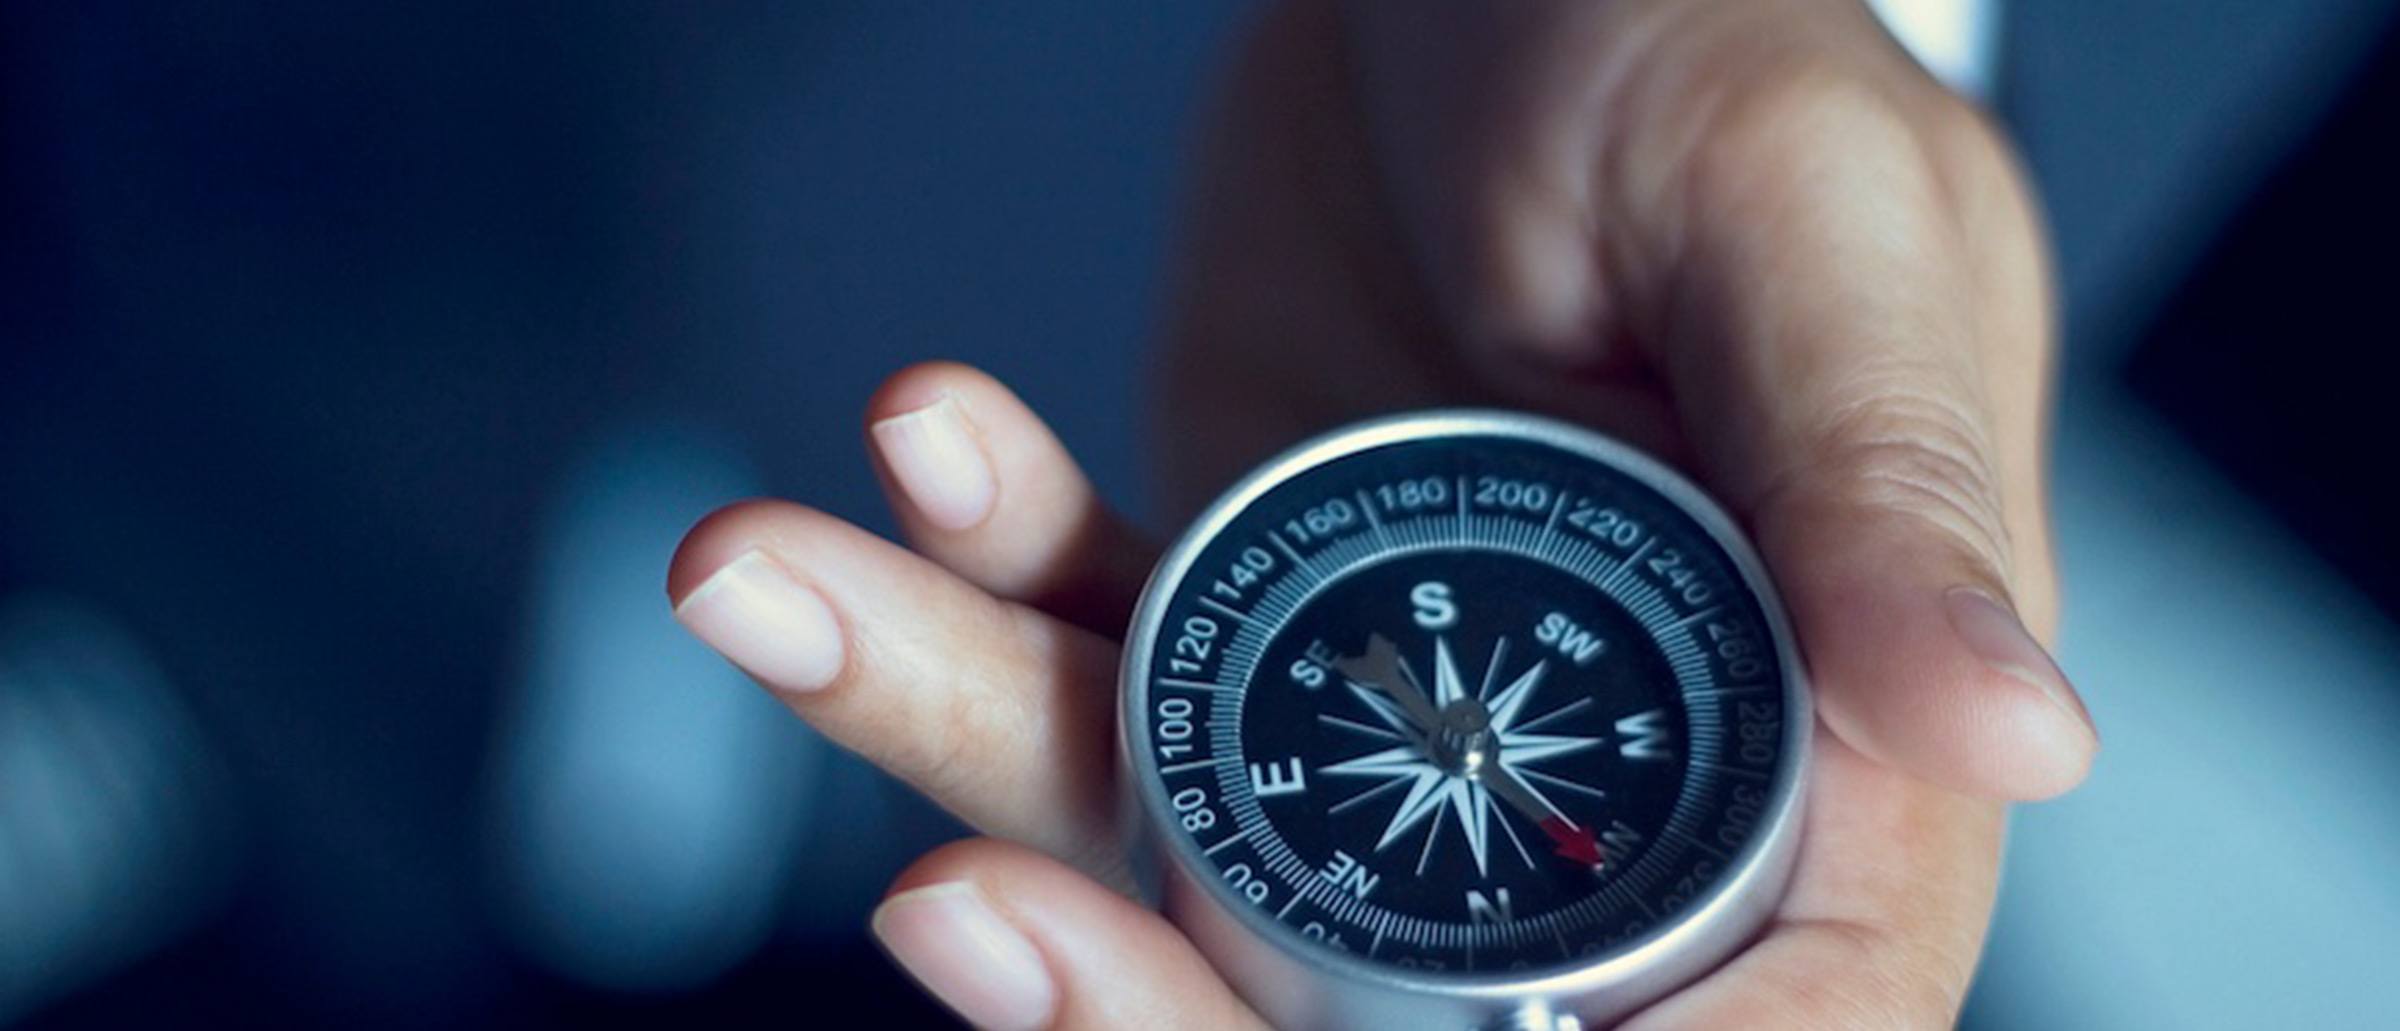 A hand holding a grey, black and white compass with pointed red arrow